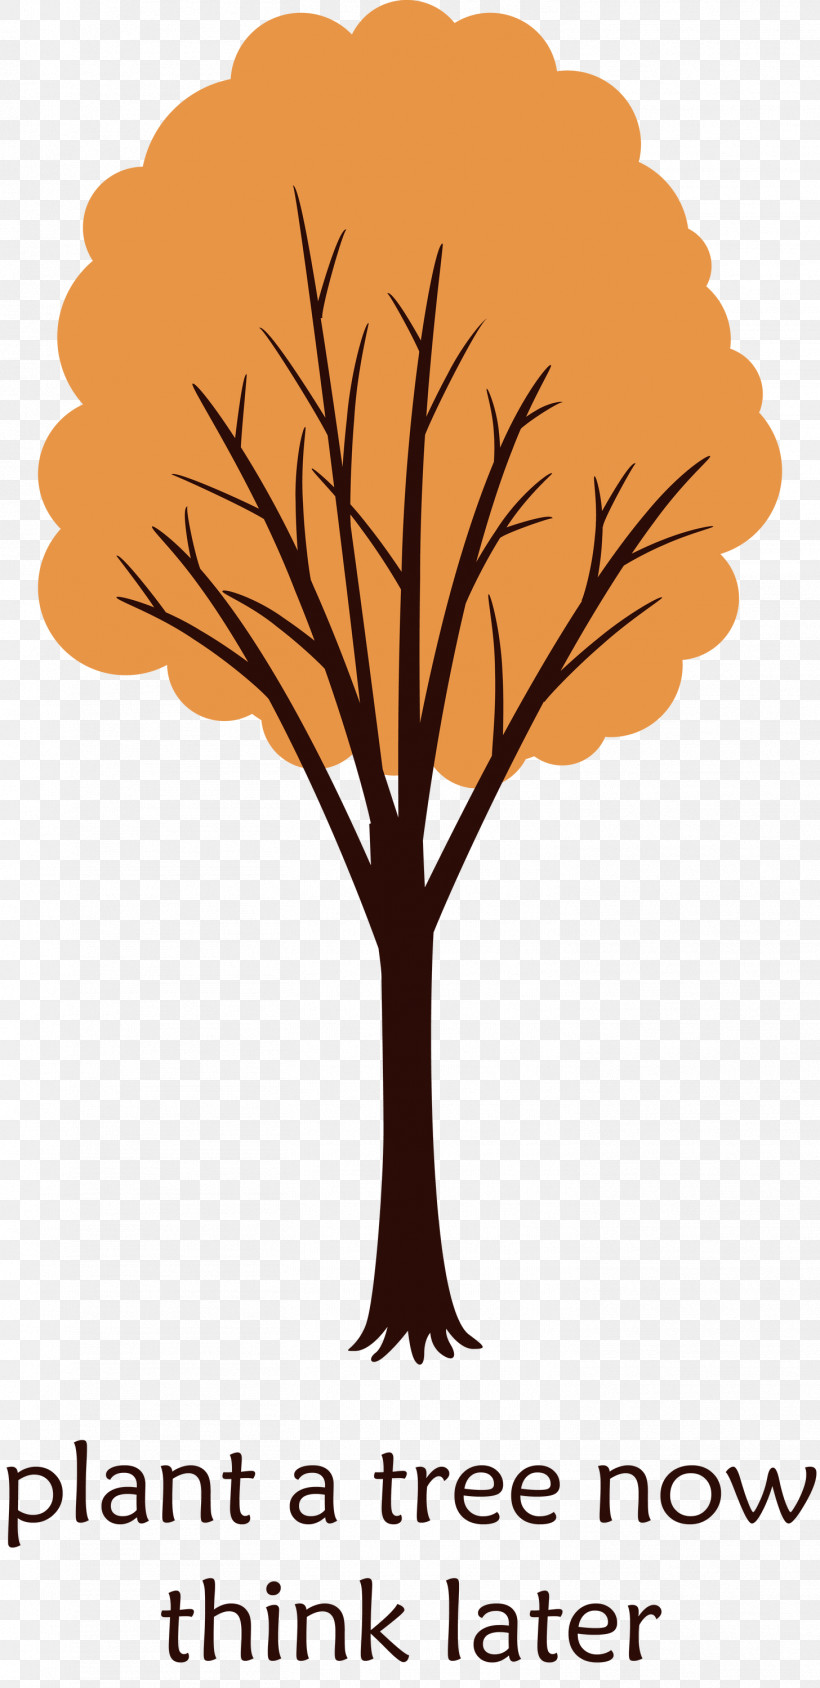 Plant A Tree Now Arbor Day Tree, PNG, 1456x2999px, Arbor Day, Blog, Destiny, Earthly Branches, Four Pillars Of Destiny Download Free